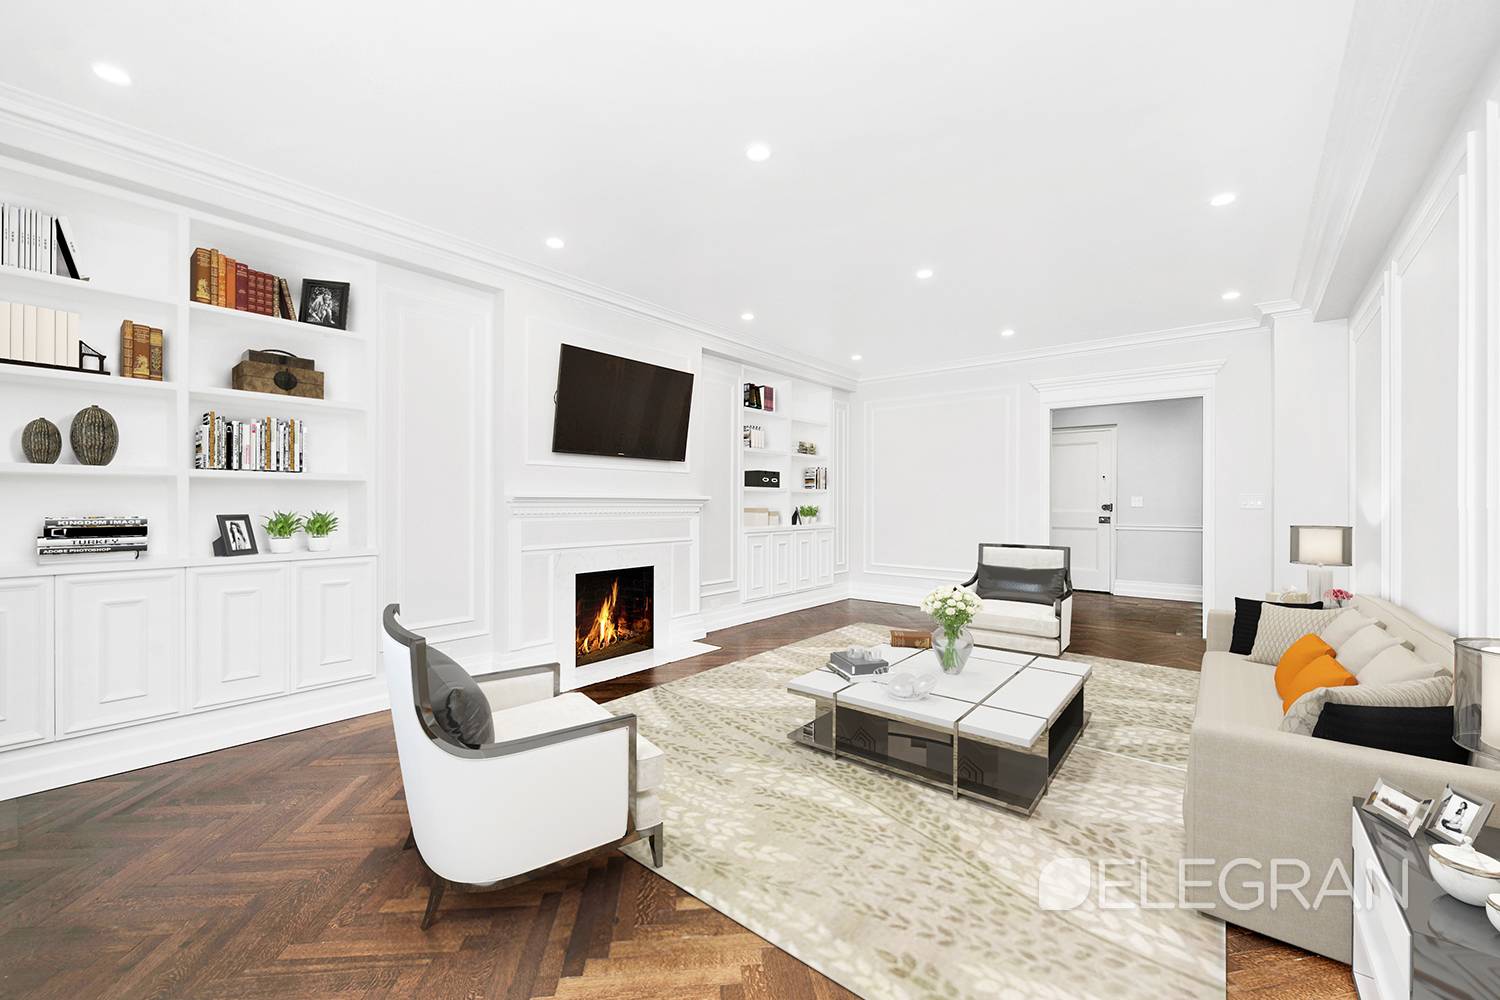 Located in the charming, prestigious Upper East Side, 50 East 72nd Street is a gem and this 3 bed, 3.